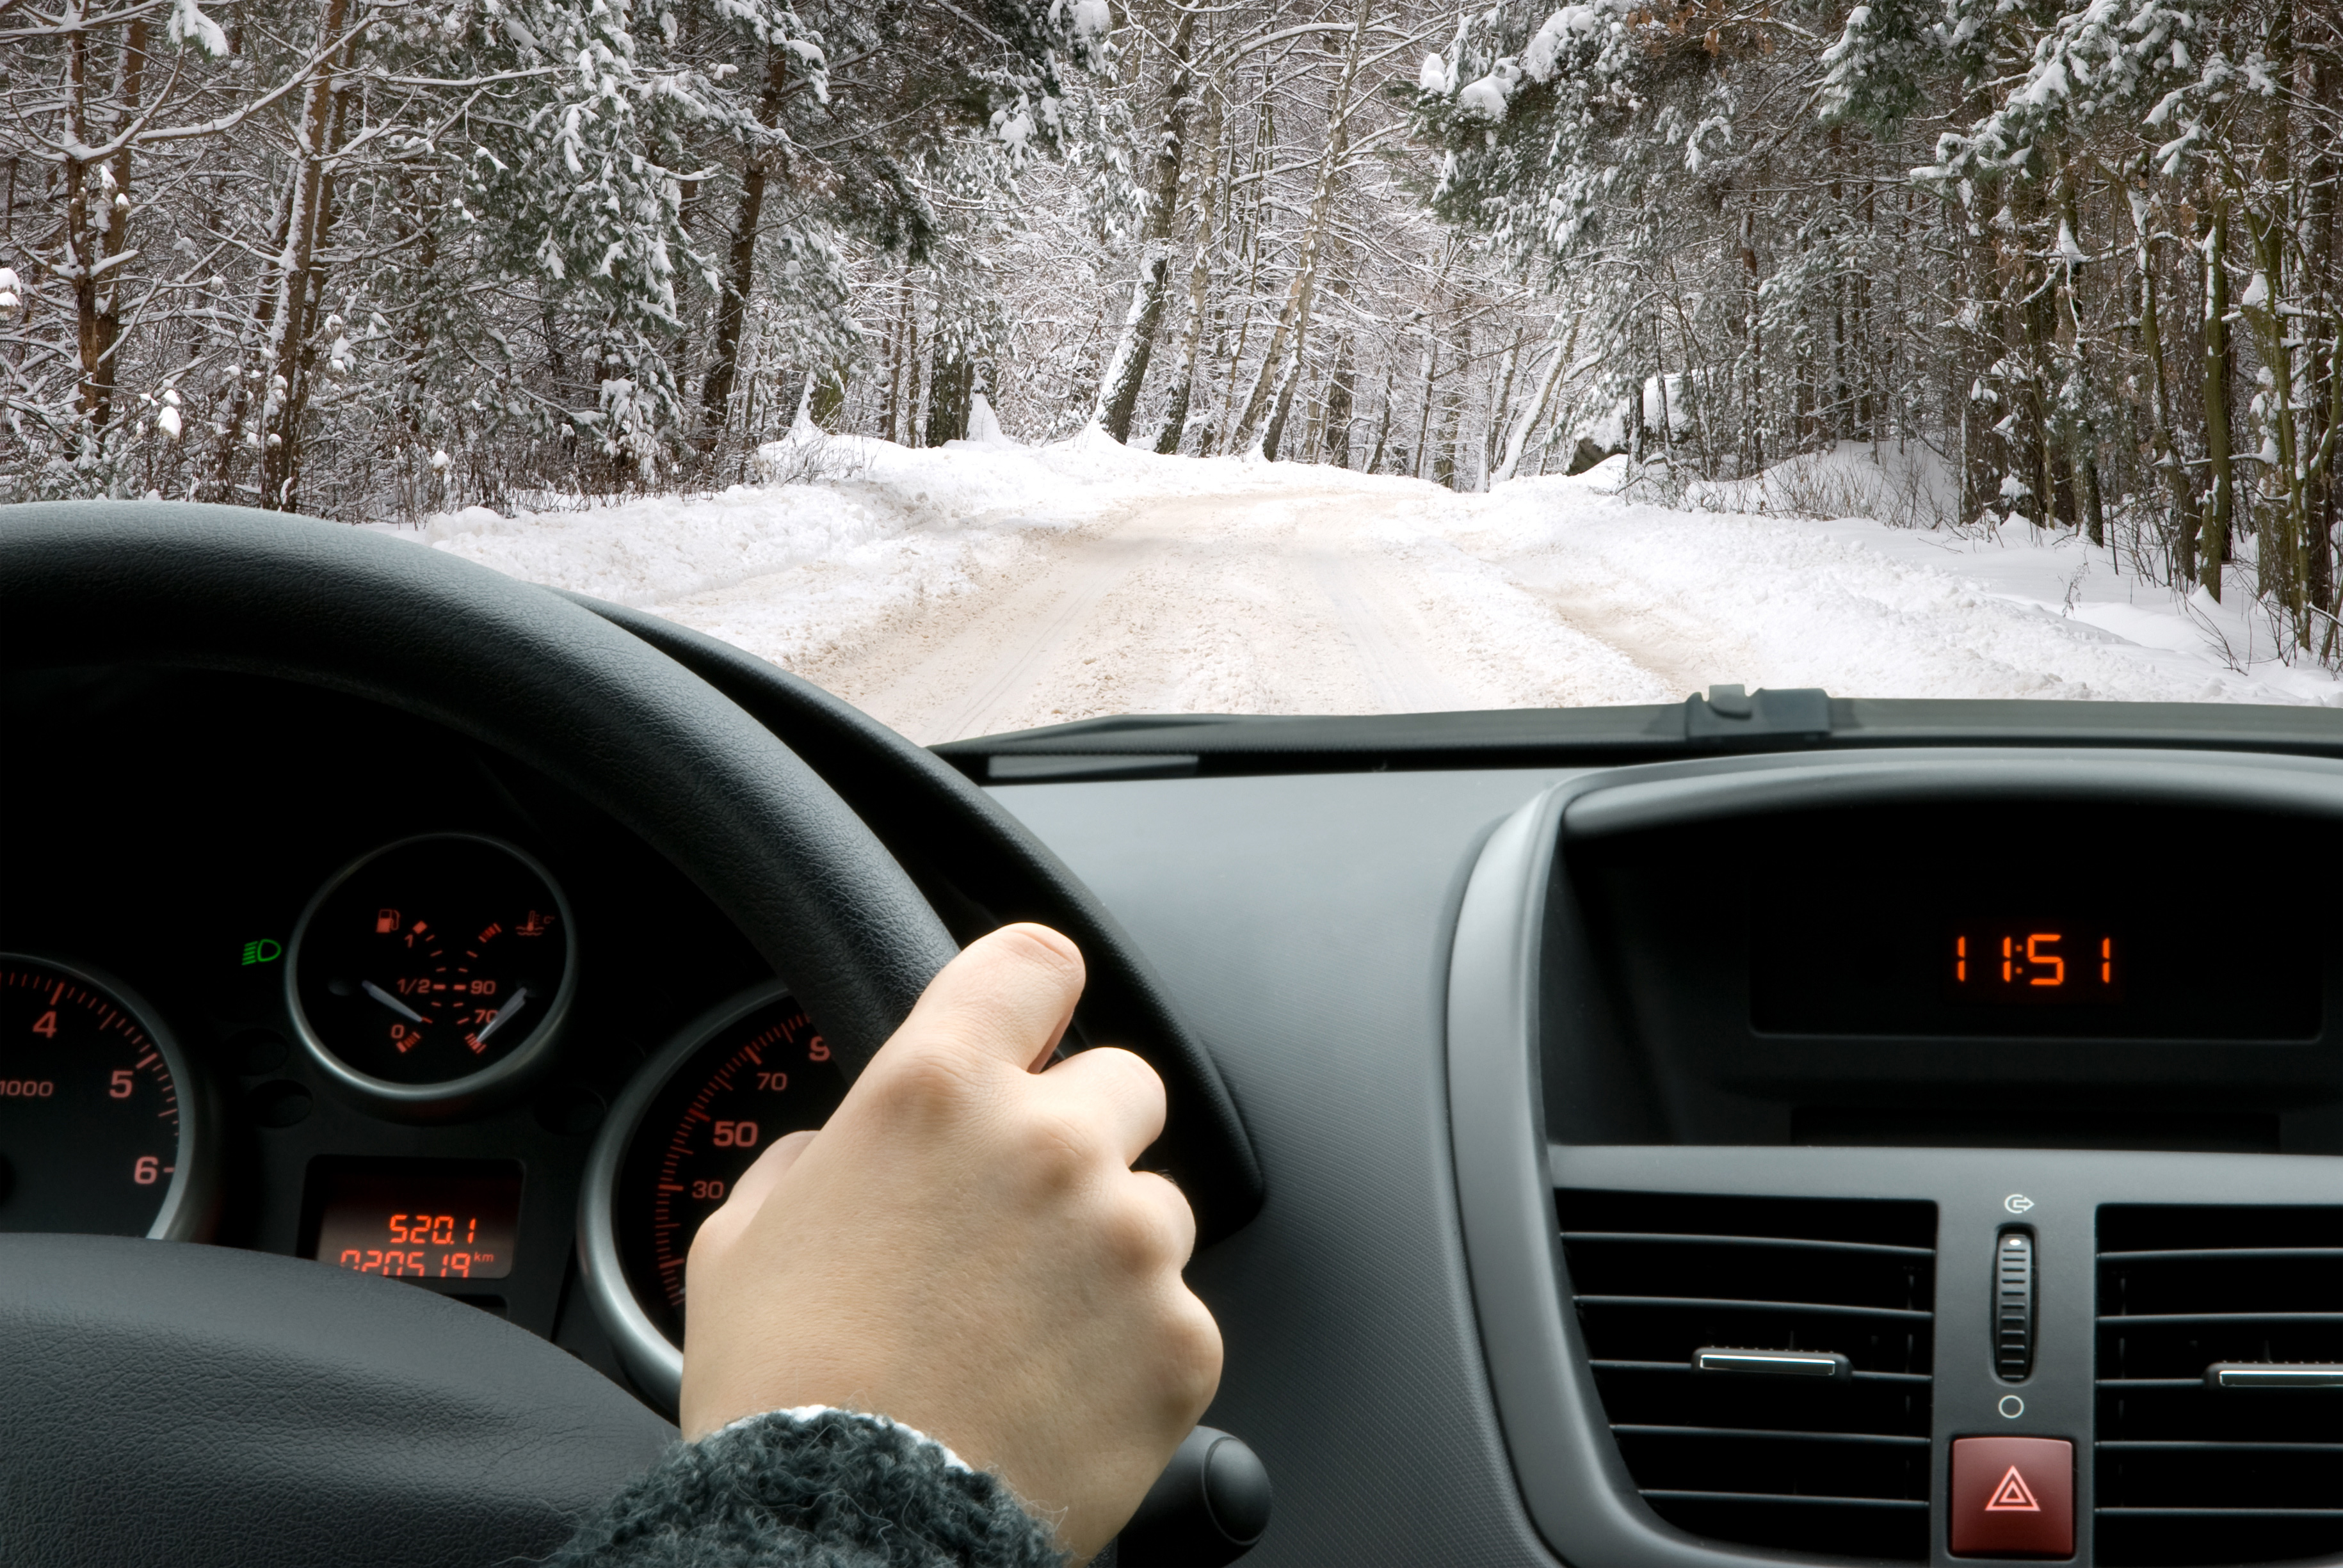 Ask a Technician: Should I Warm My Car Up before Driving in Winter Weather?